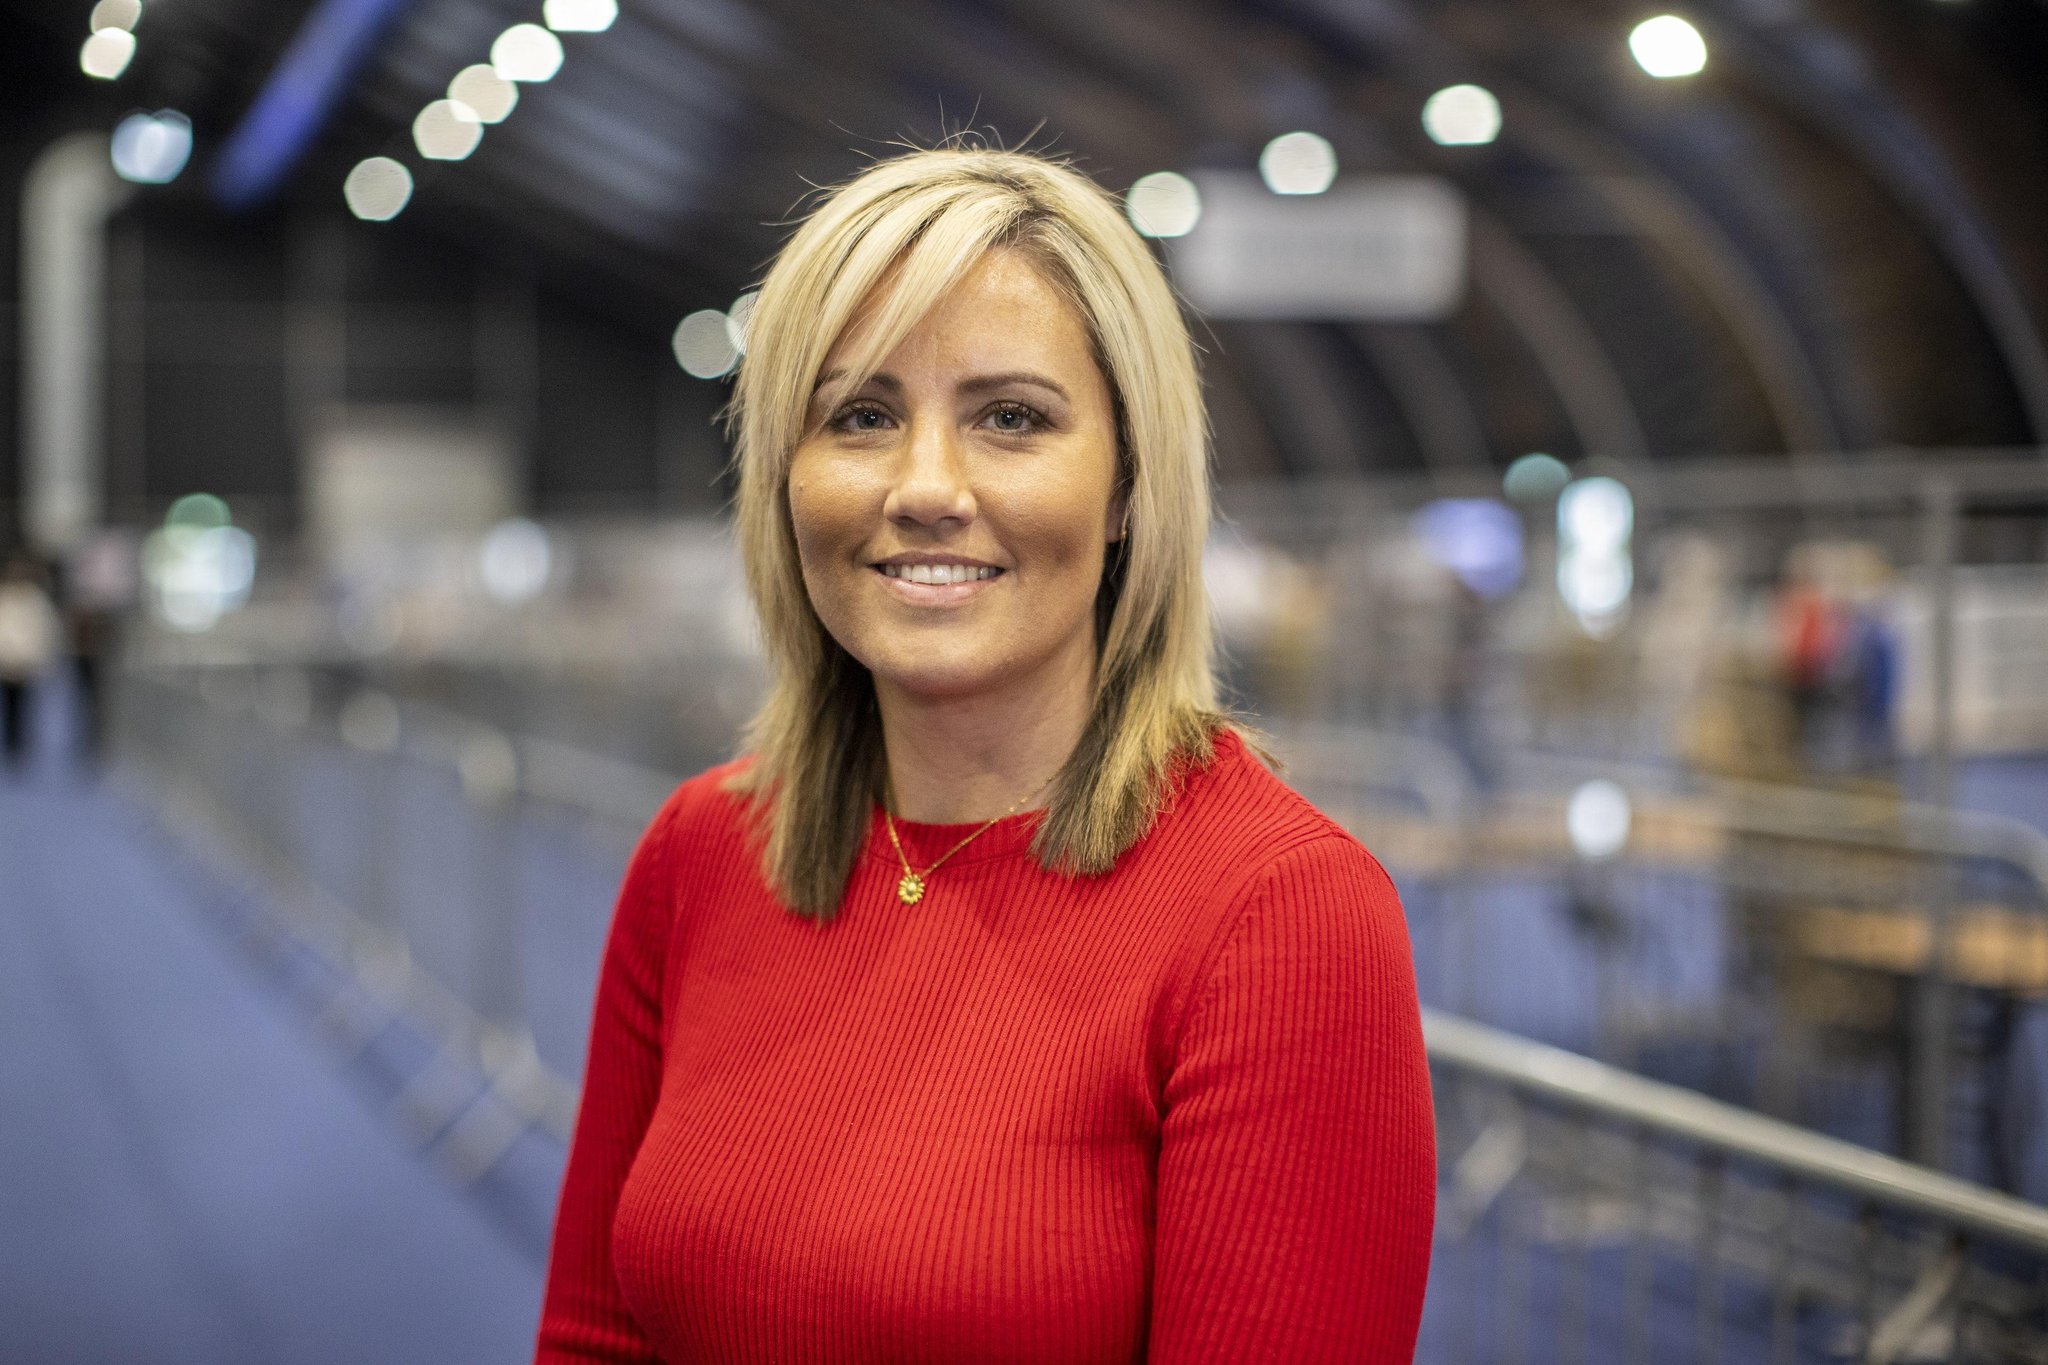 Election 2022: Transfer of votes 'example of unionist unity', says DUP's Diane Forsythe